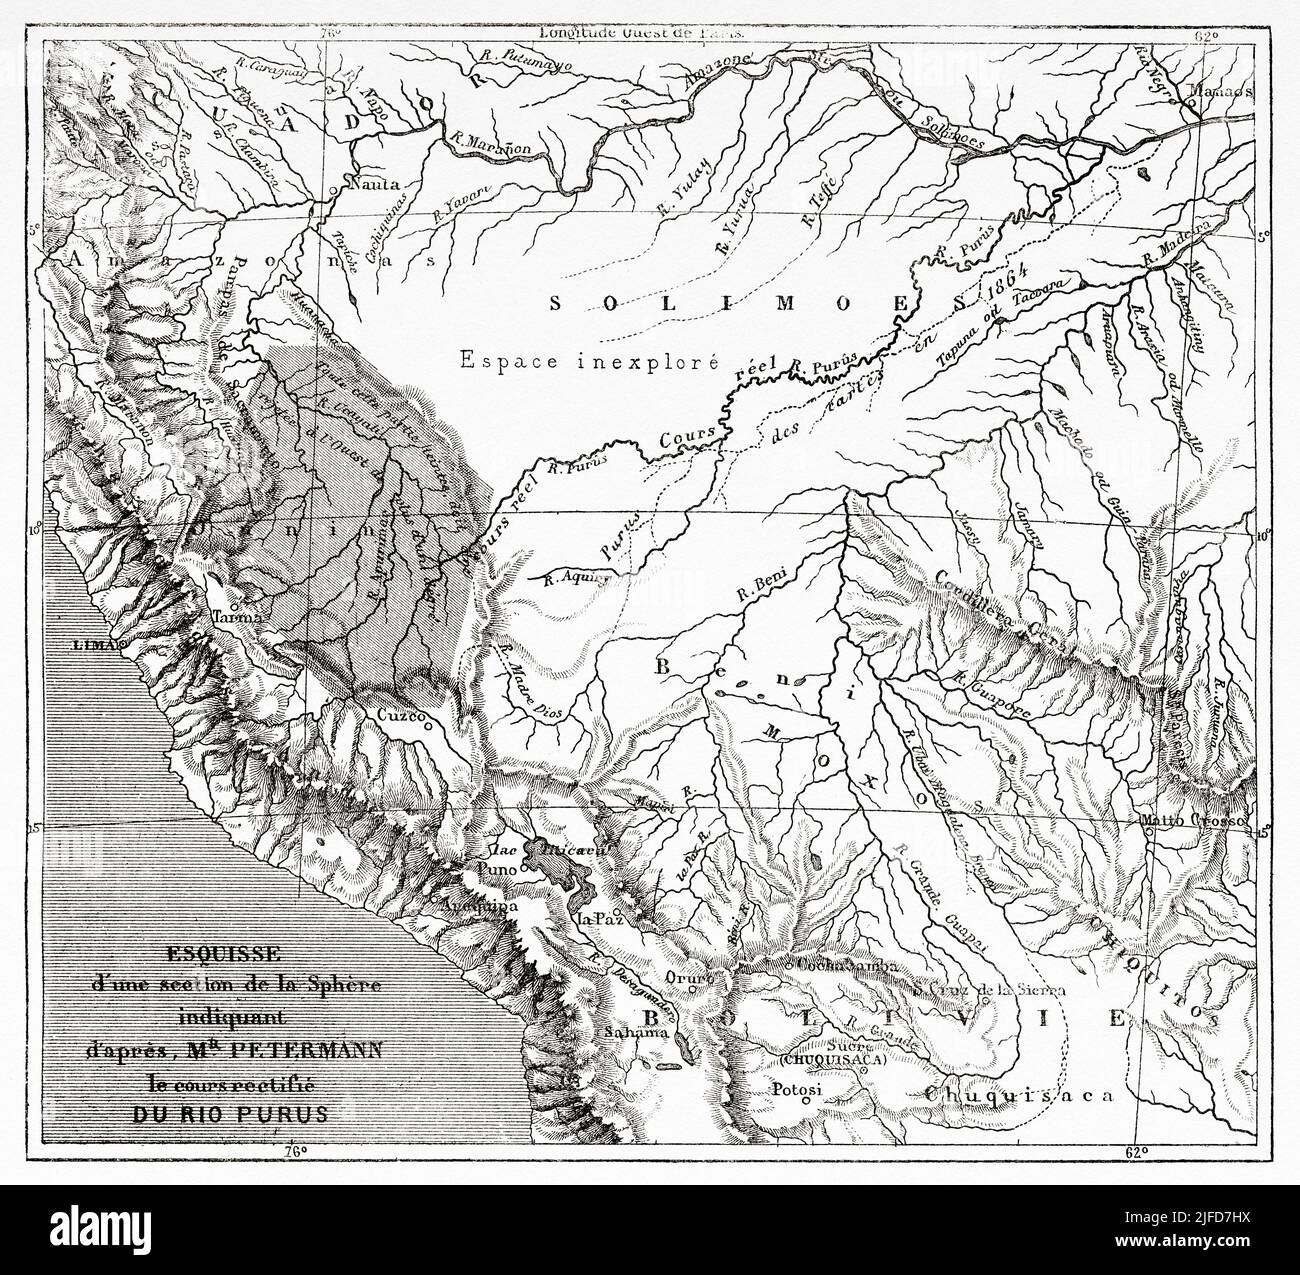 Purus river basin old map. South America. Journey through South America, from the Pacific Ocean to the Atlantic Ocean by Paul Marcoy 1848-1860 from Le Tour du Monde 1867 Stock Photo